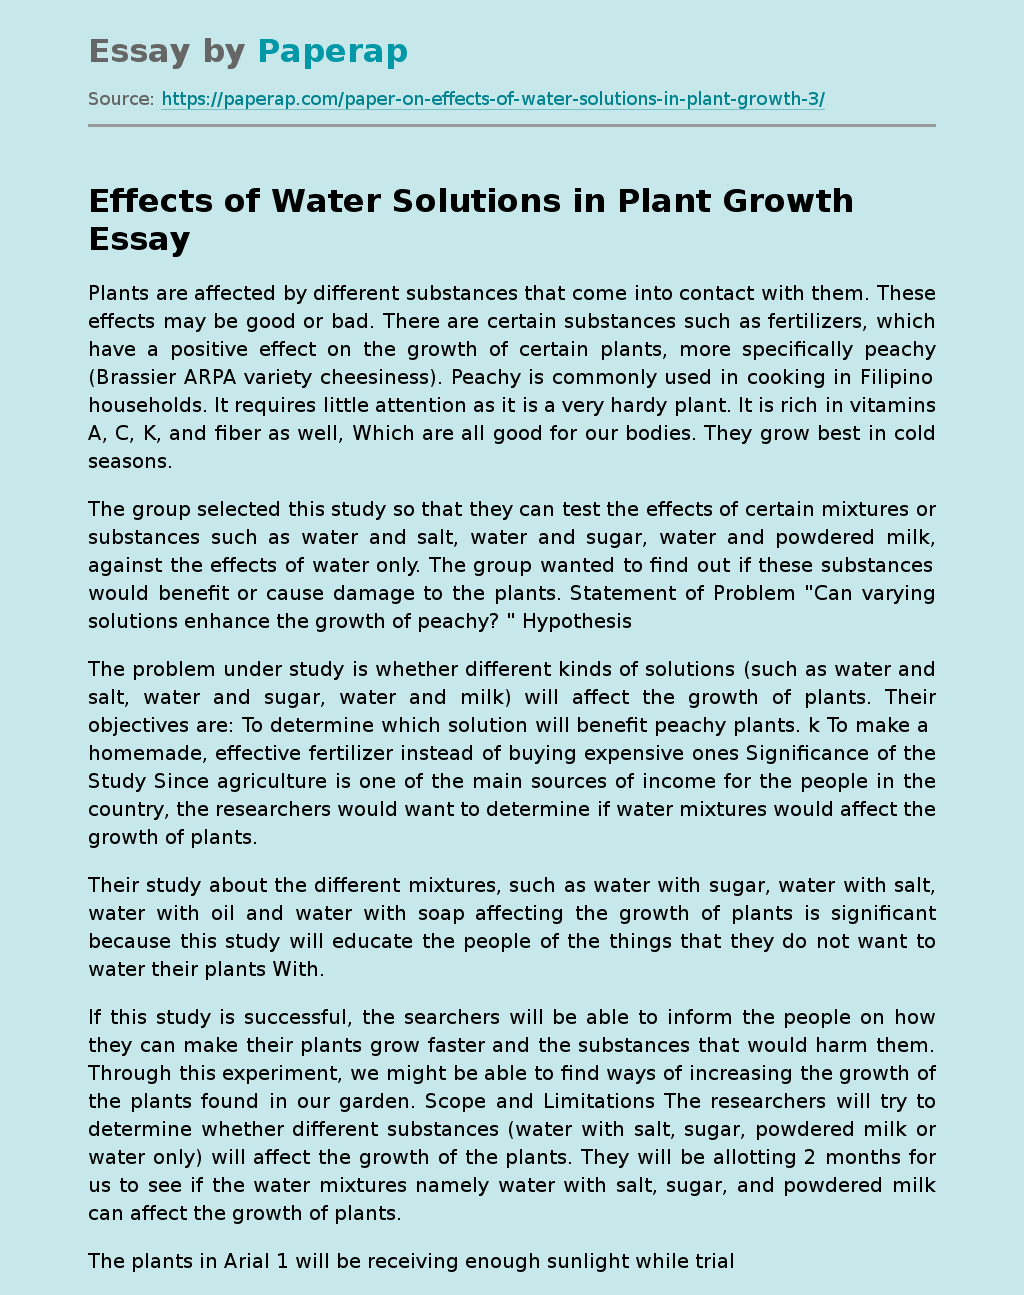 Effects of Water Solutions in Plant Growth